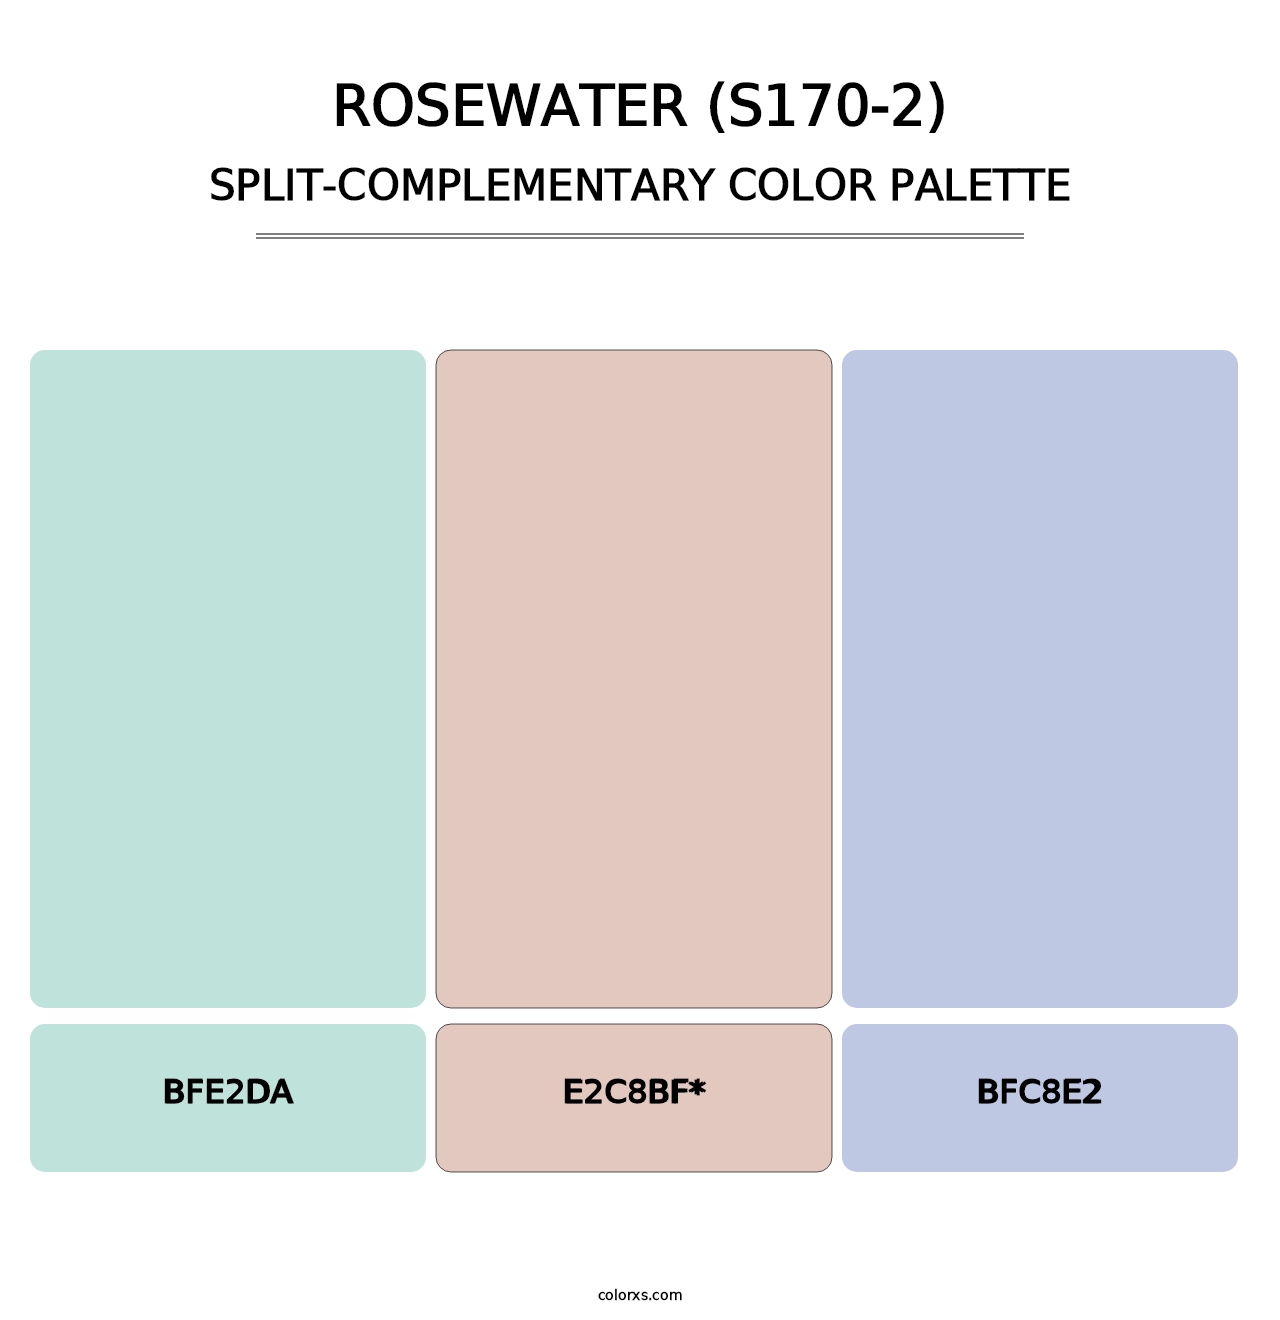 Rosewater (S170-2) - Split-Complementary Color Palette